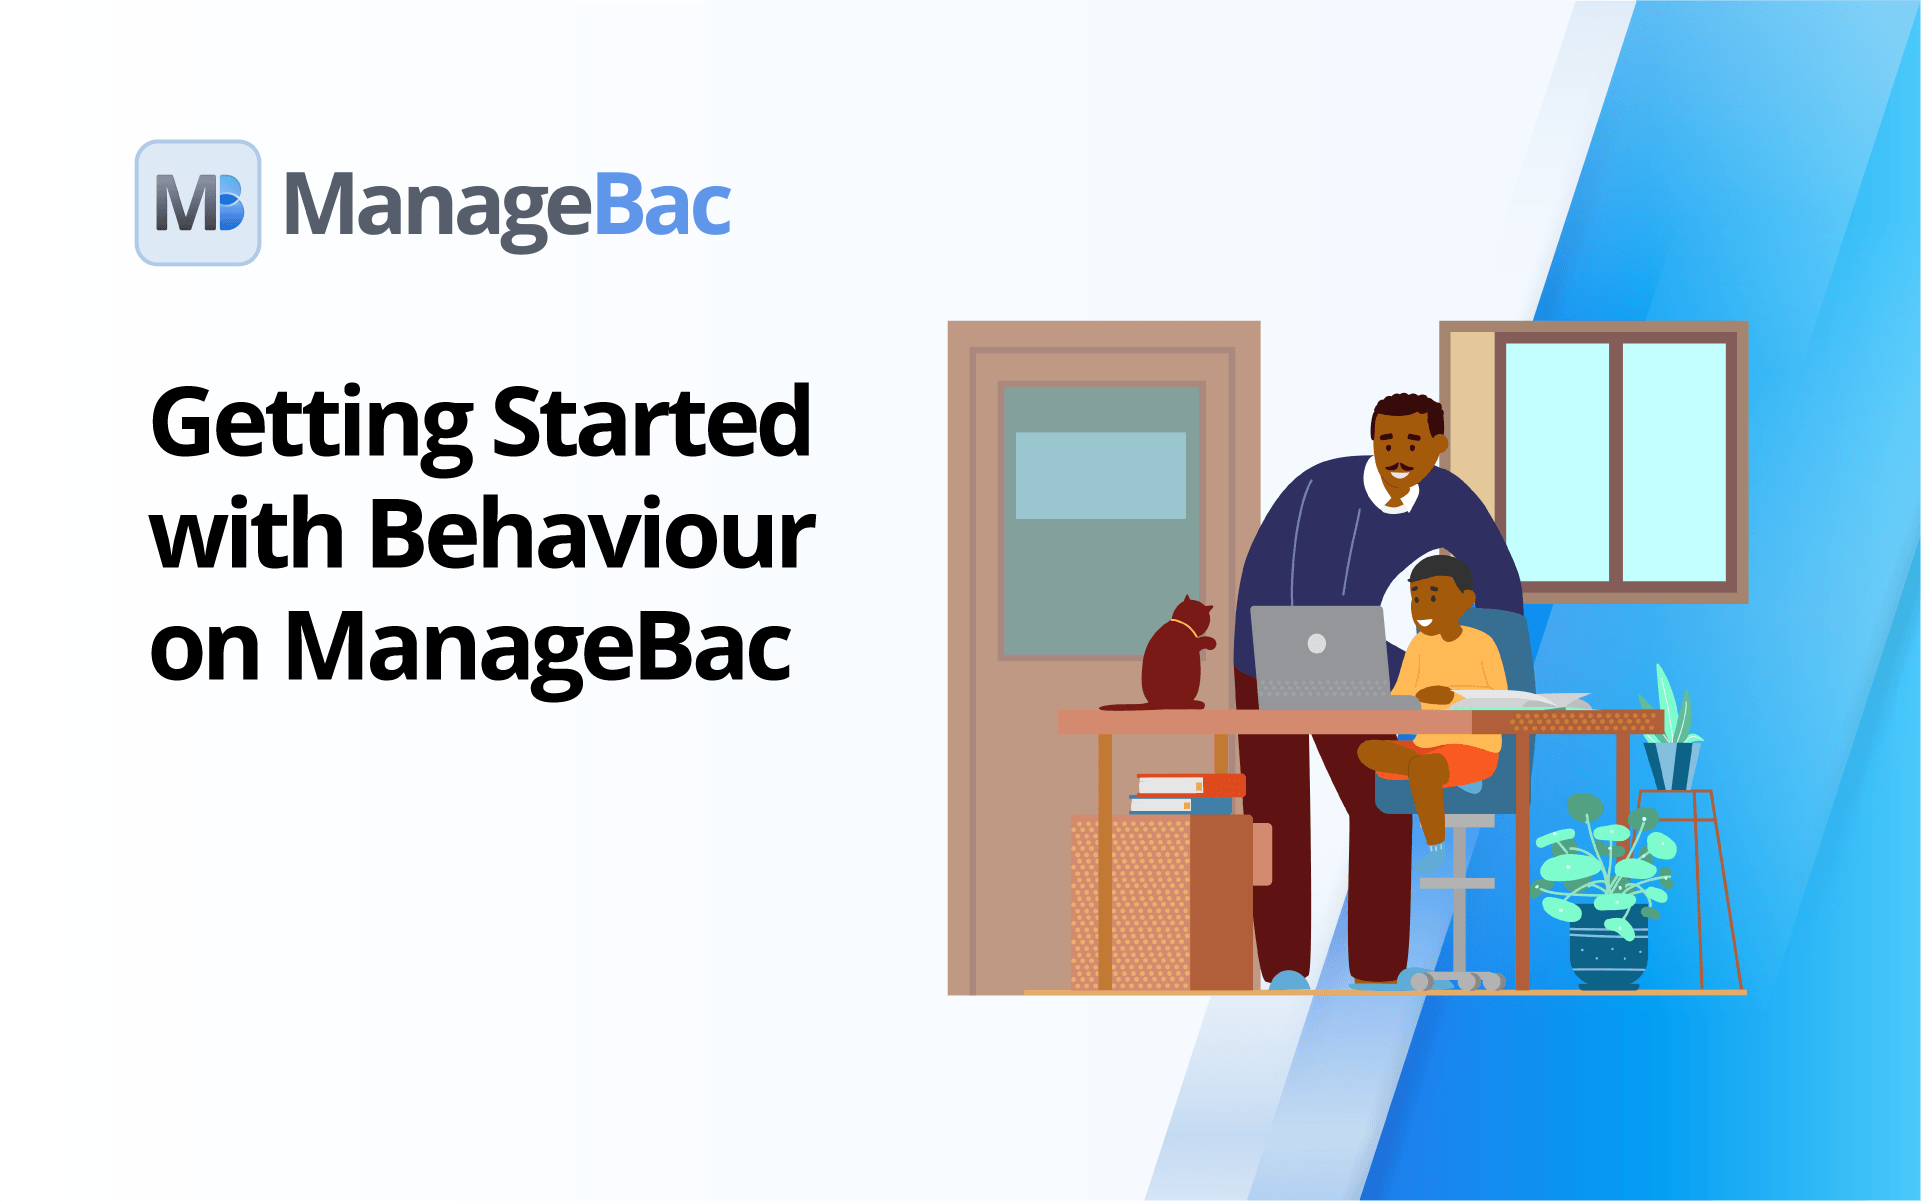 Getting Started with Behaviour on ManageBac